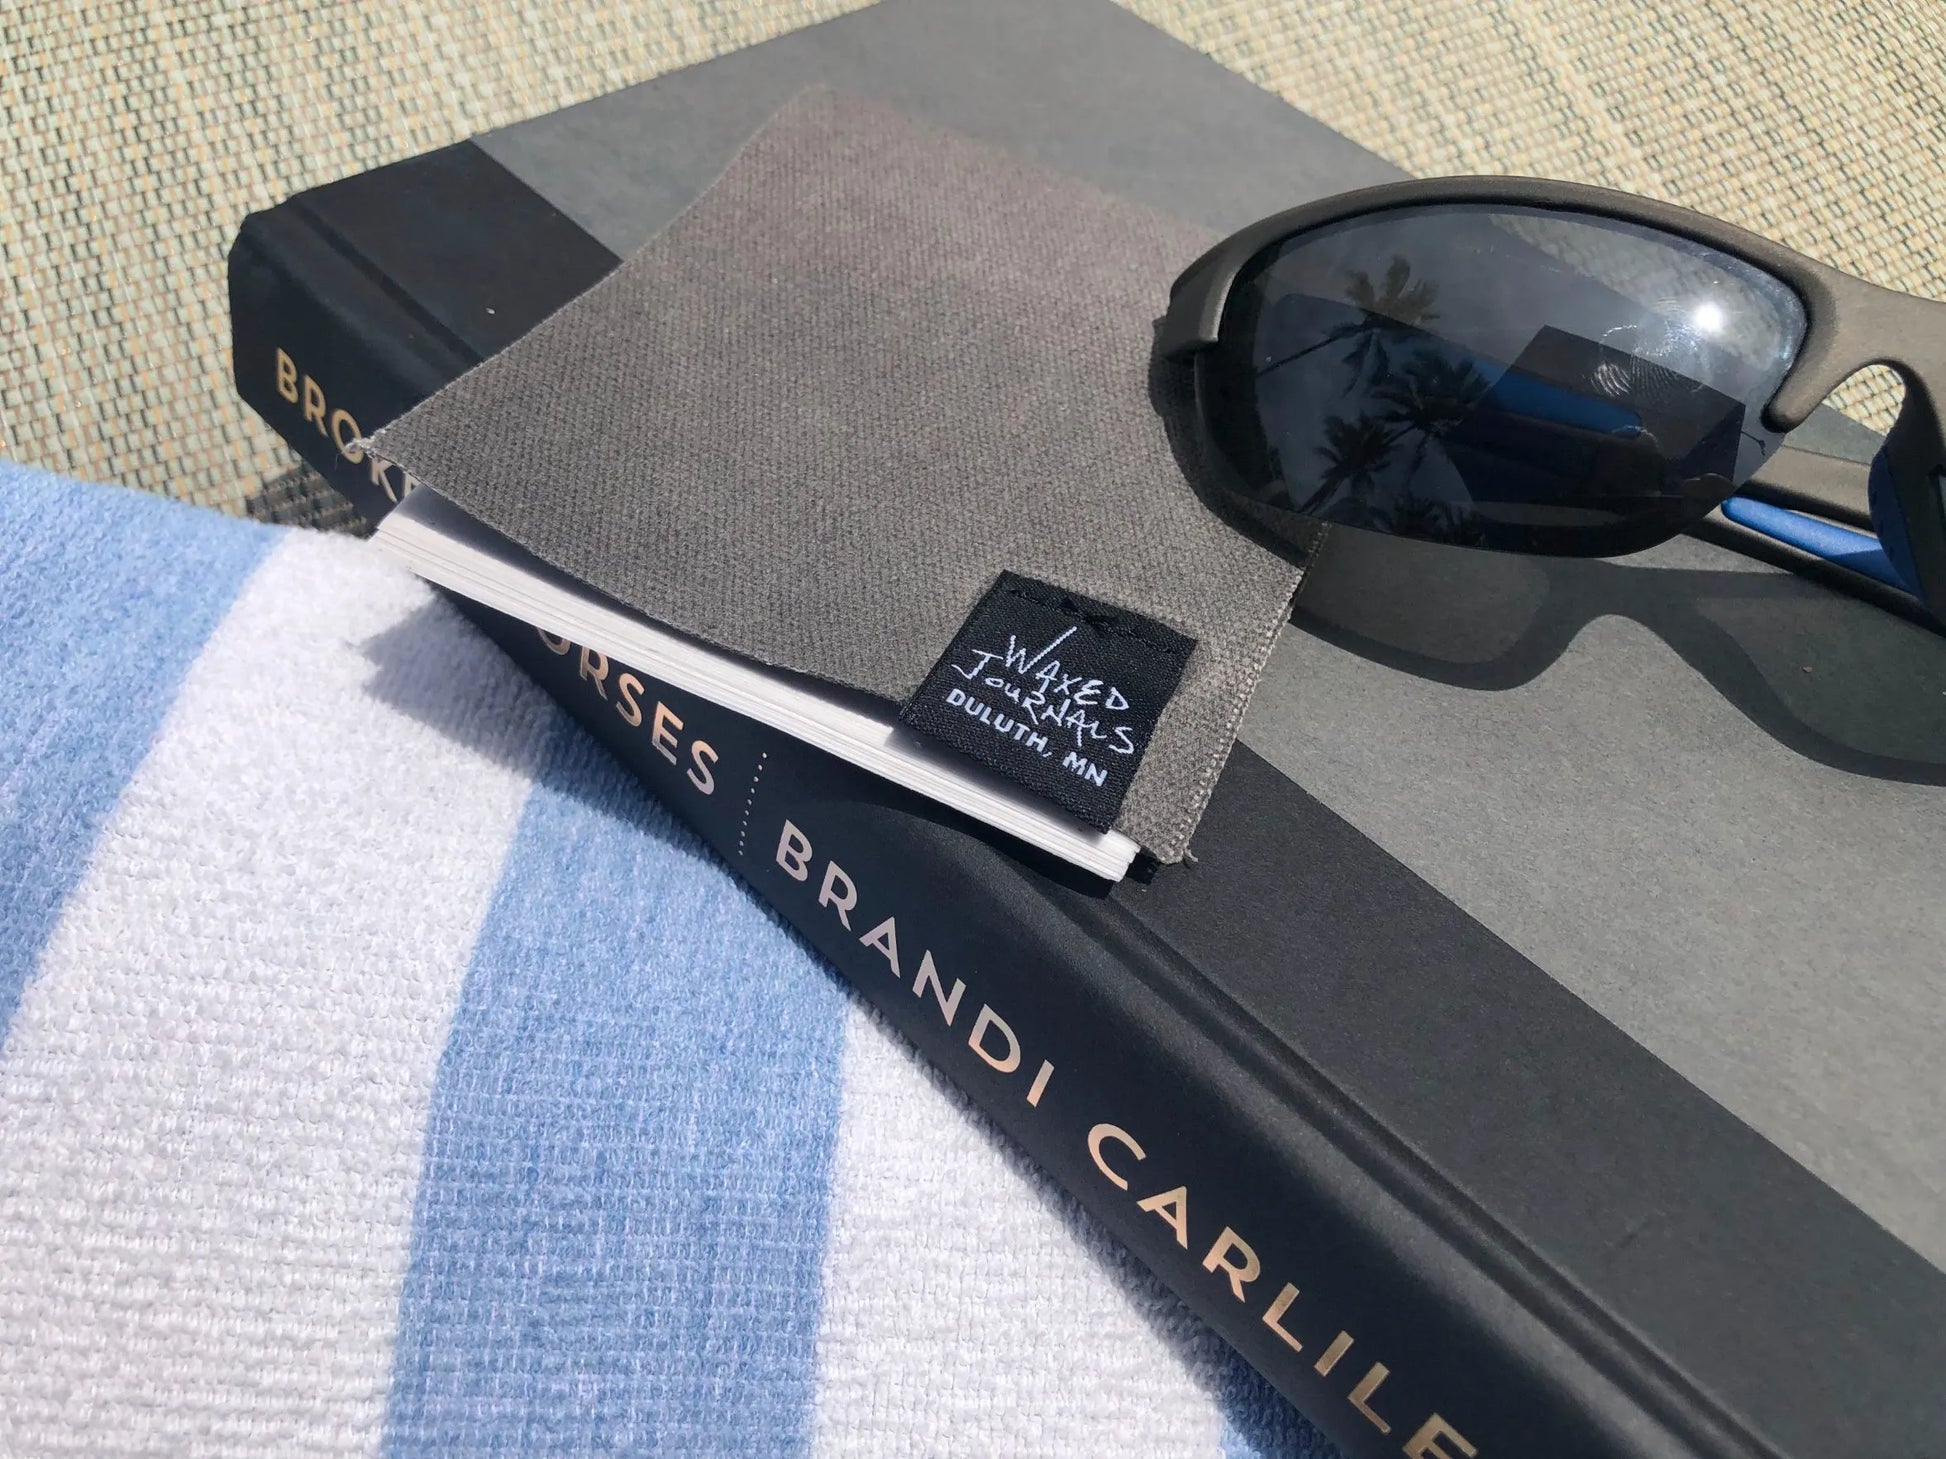 Gray notepad on a book next to sunglasses.